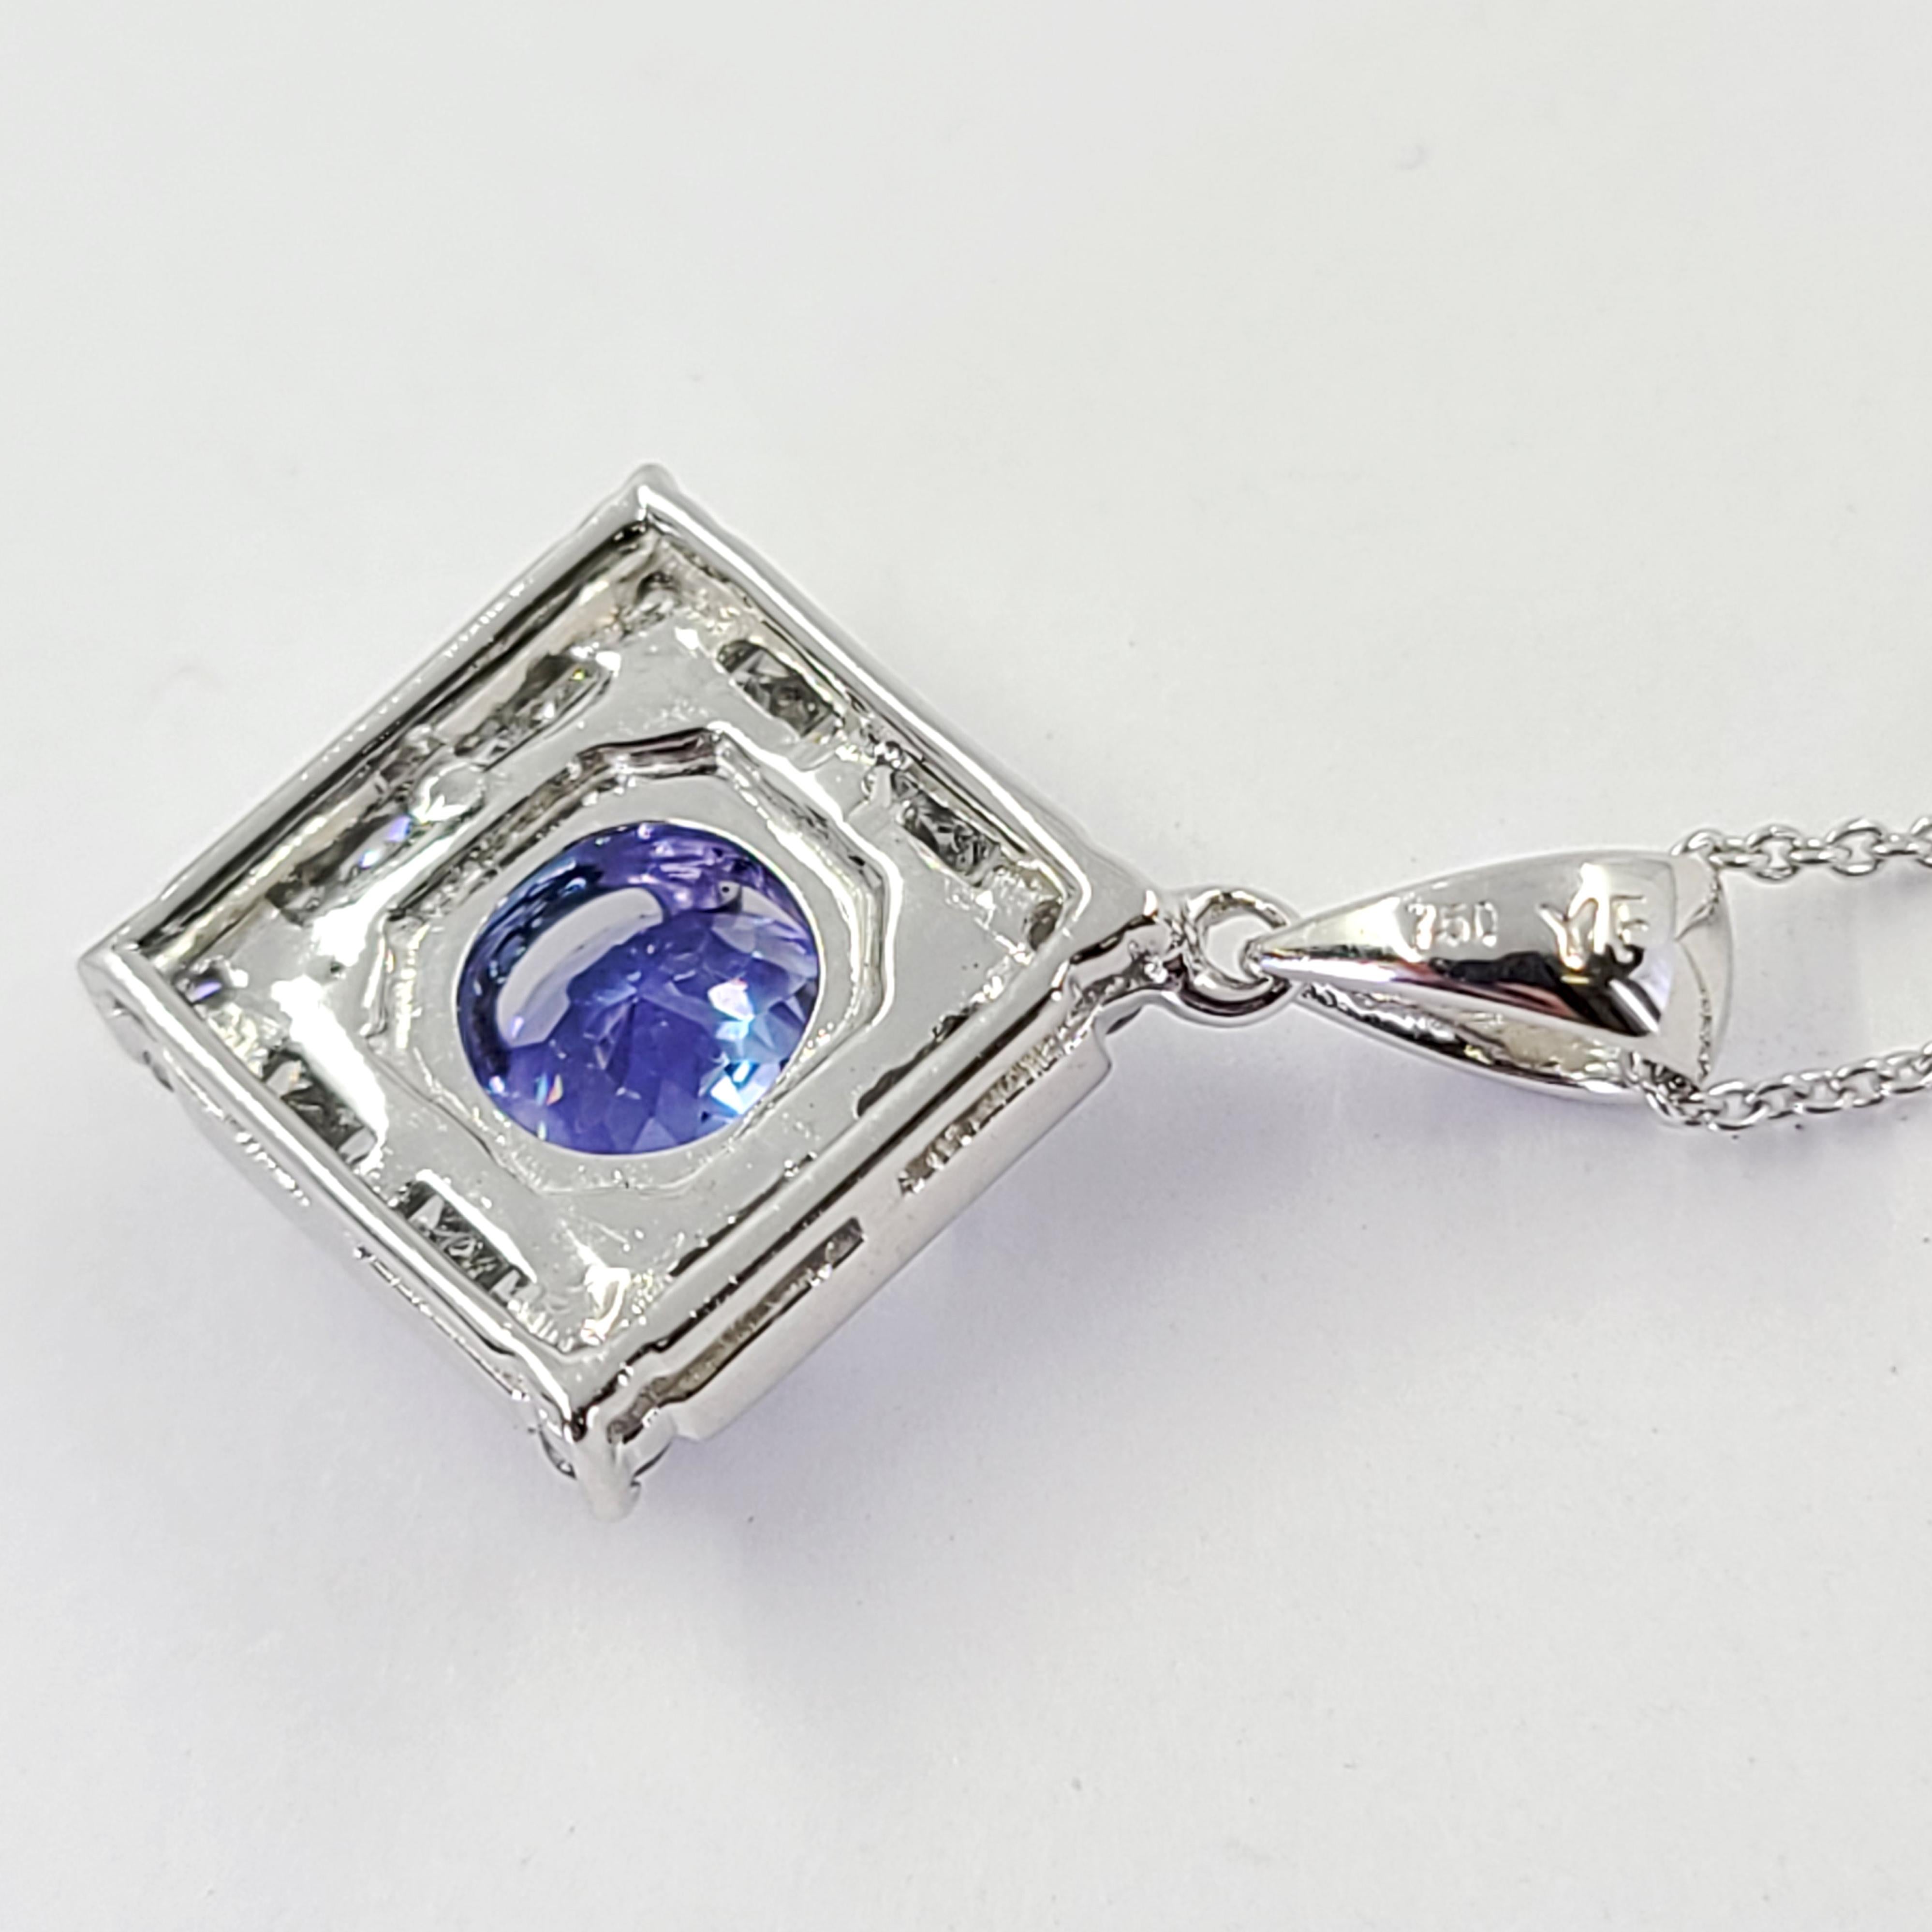 18 Karat White Gold Pendant Featuring A 0.85 Carat Round Tanzanite Surrounded By 20 Princess Cut Diamonds of VS Clarity and G Color Totaling 0.50 Carats. 1 Inch Length Including Bale. 16 inch rolo chain with lobster clasp.